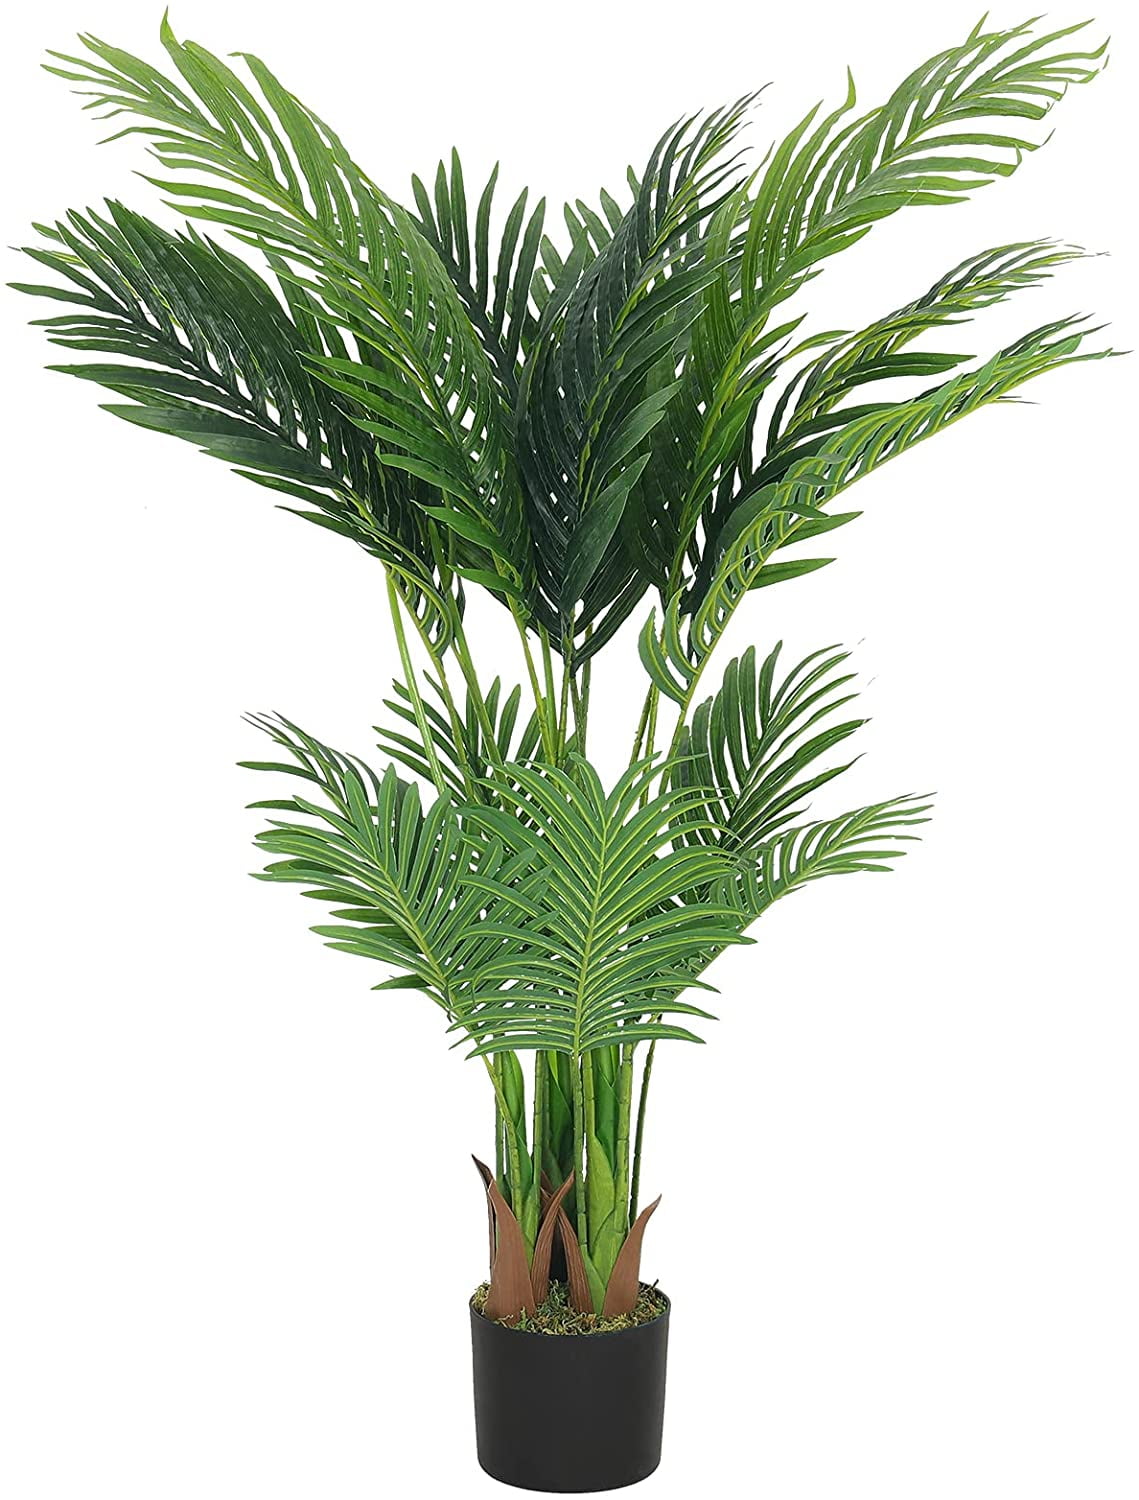 Artificial Plant Indoor Outdoor Potted Paradise Palm Tree Office Decor 5'6 ft 